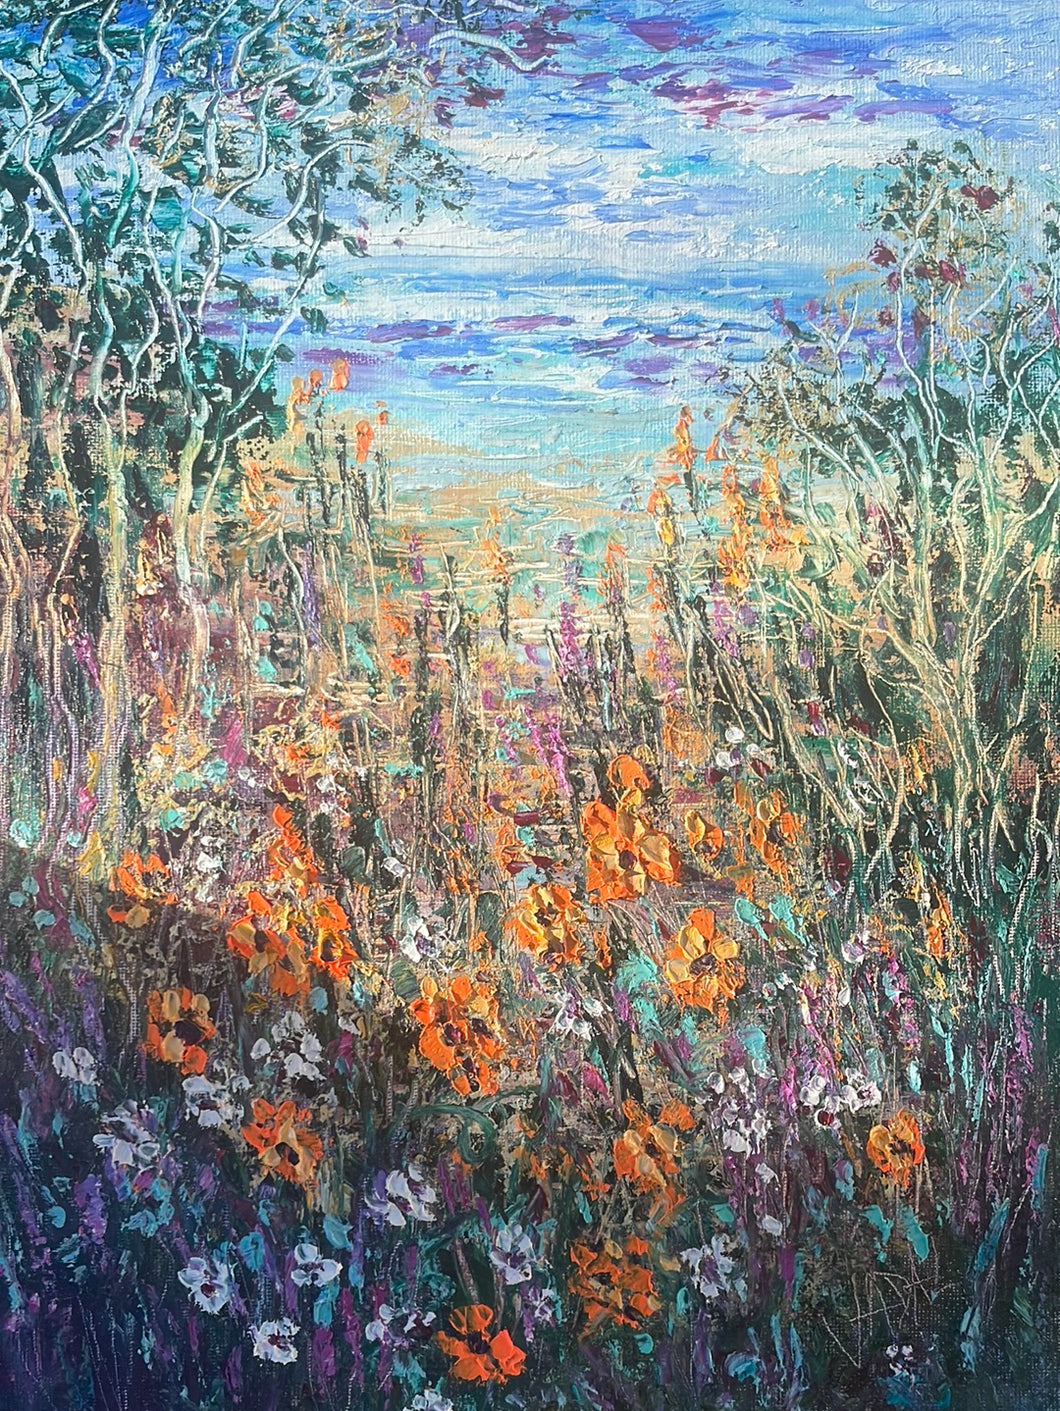 Monterey waves , trees and wildflowers   -oil and cold wax